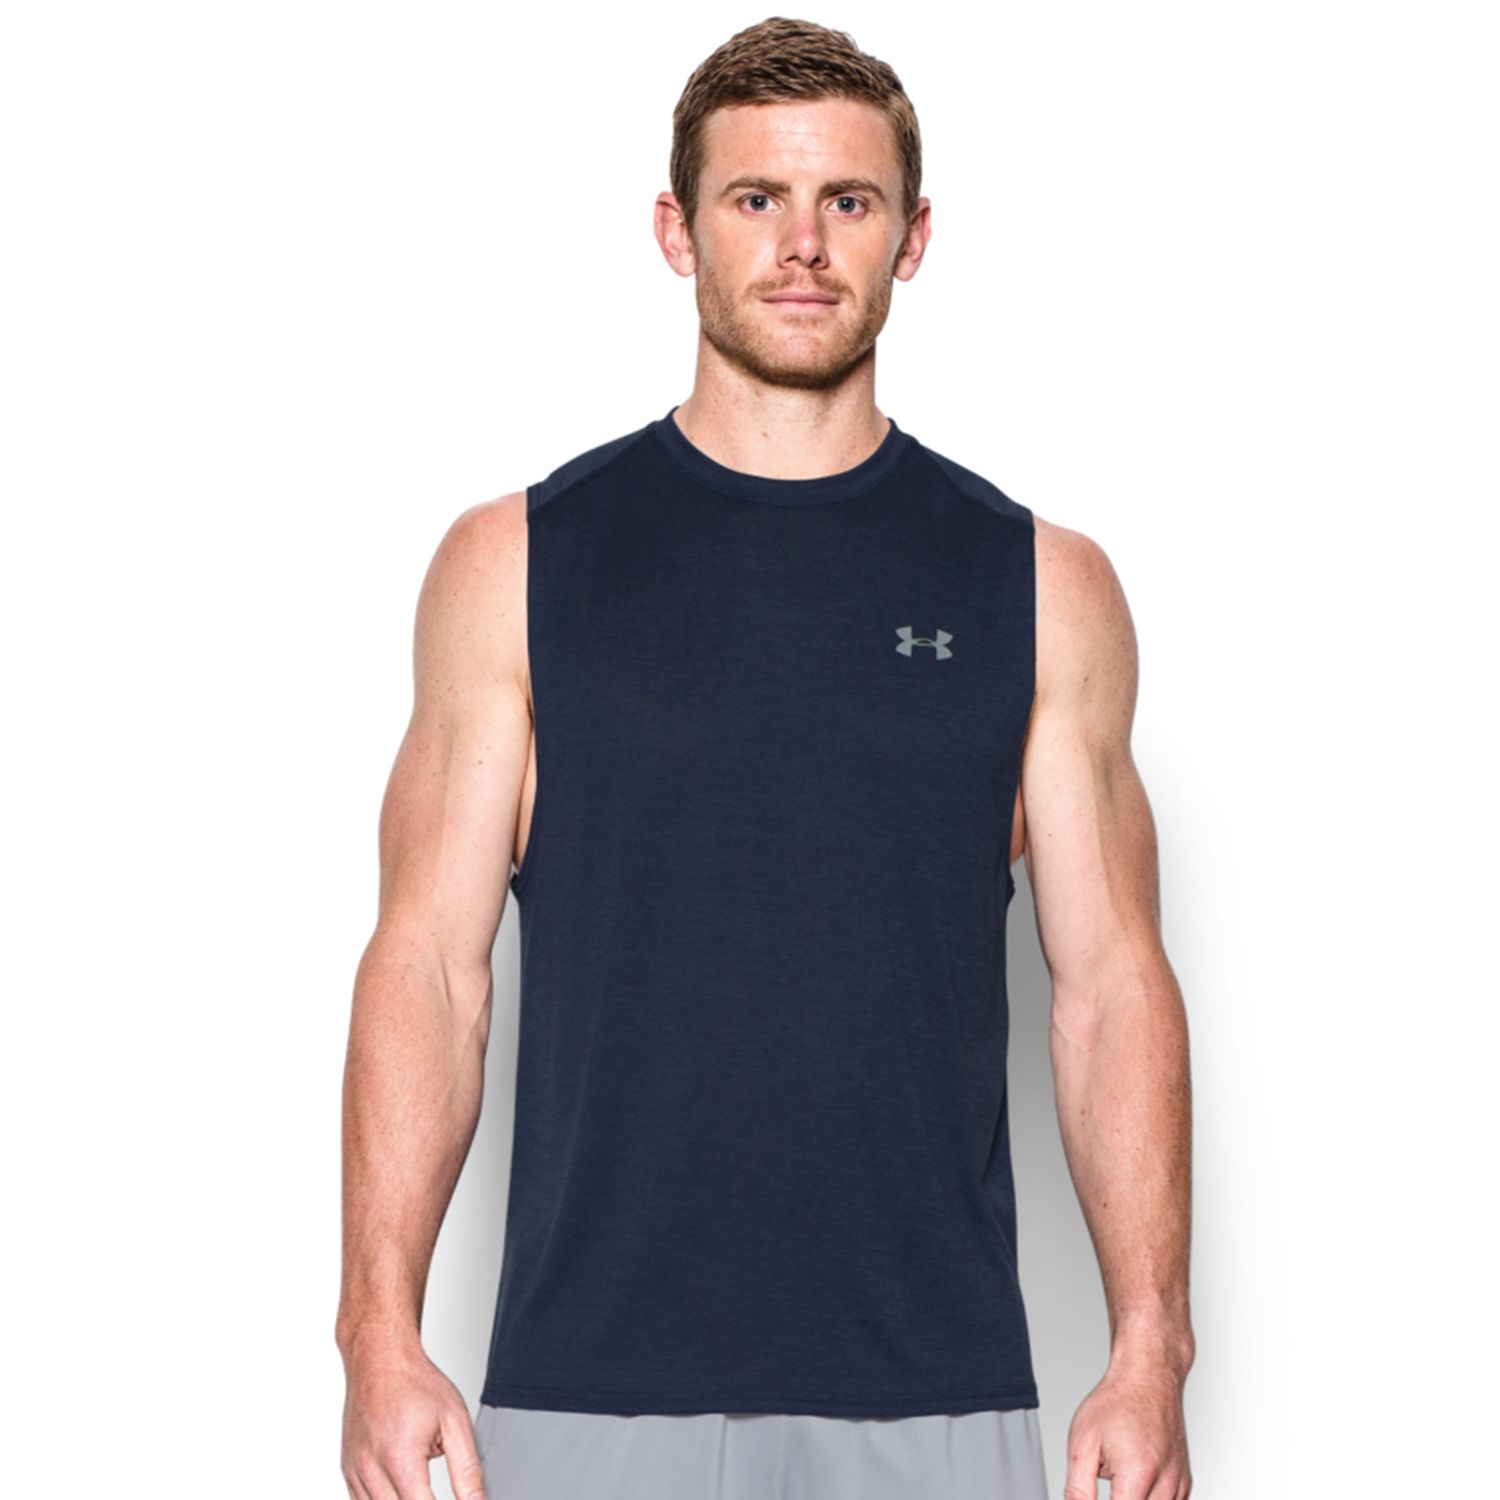 under armour muscle shirts